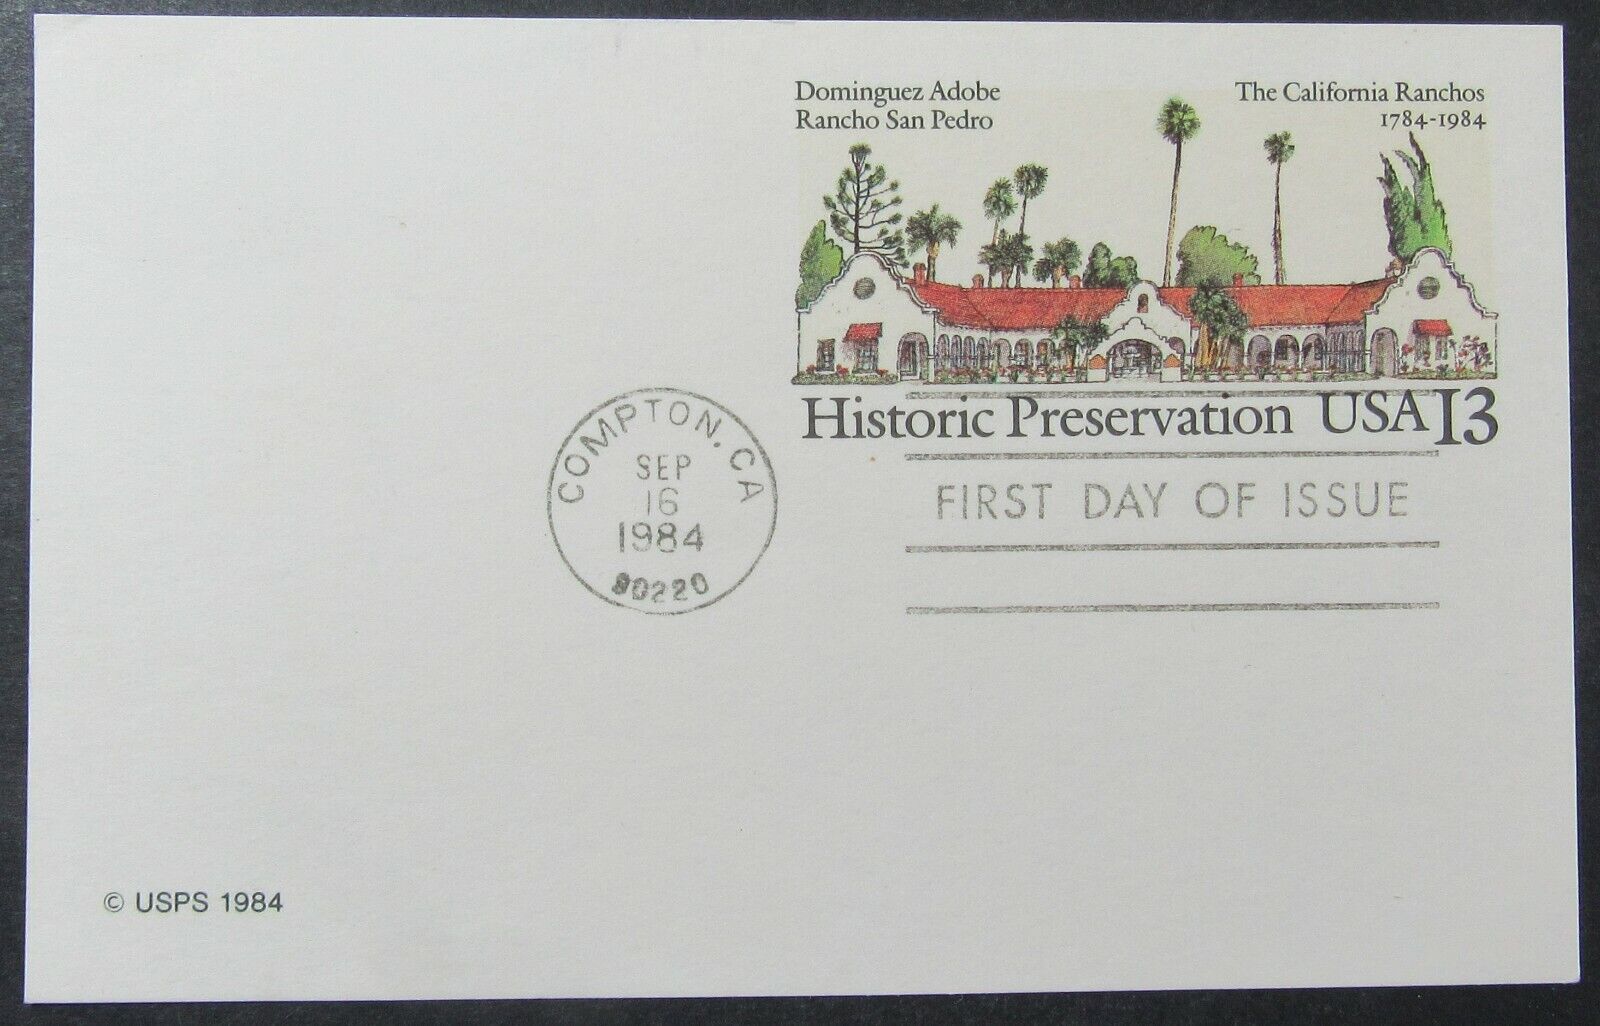 Historic Preservation California Ranchos First Day Issue Vintage 1984 Postcard 